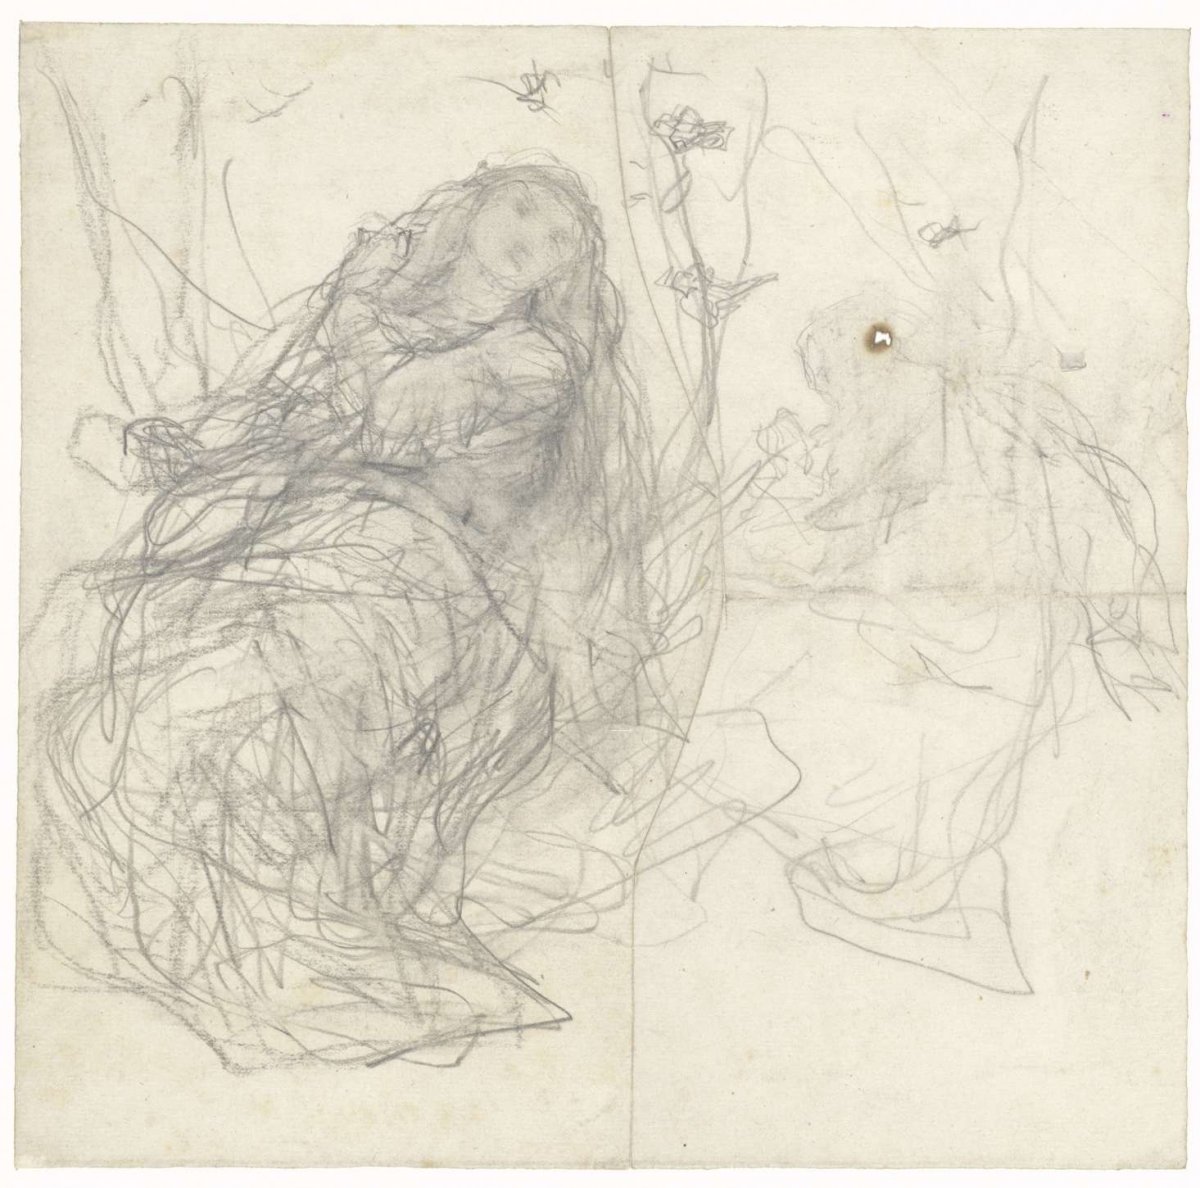 Two sketches of a girl with butterflies, Matthijs Maris, 1849 - 1917